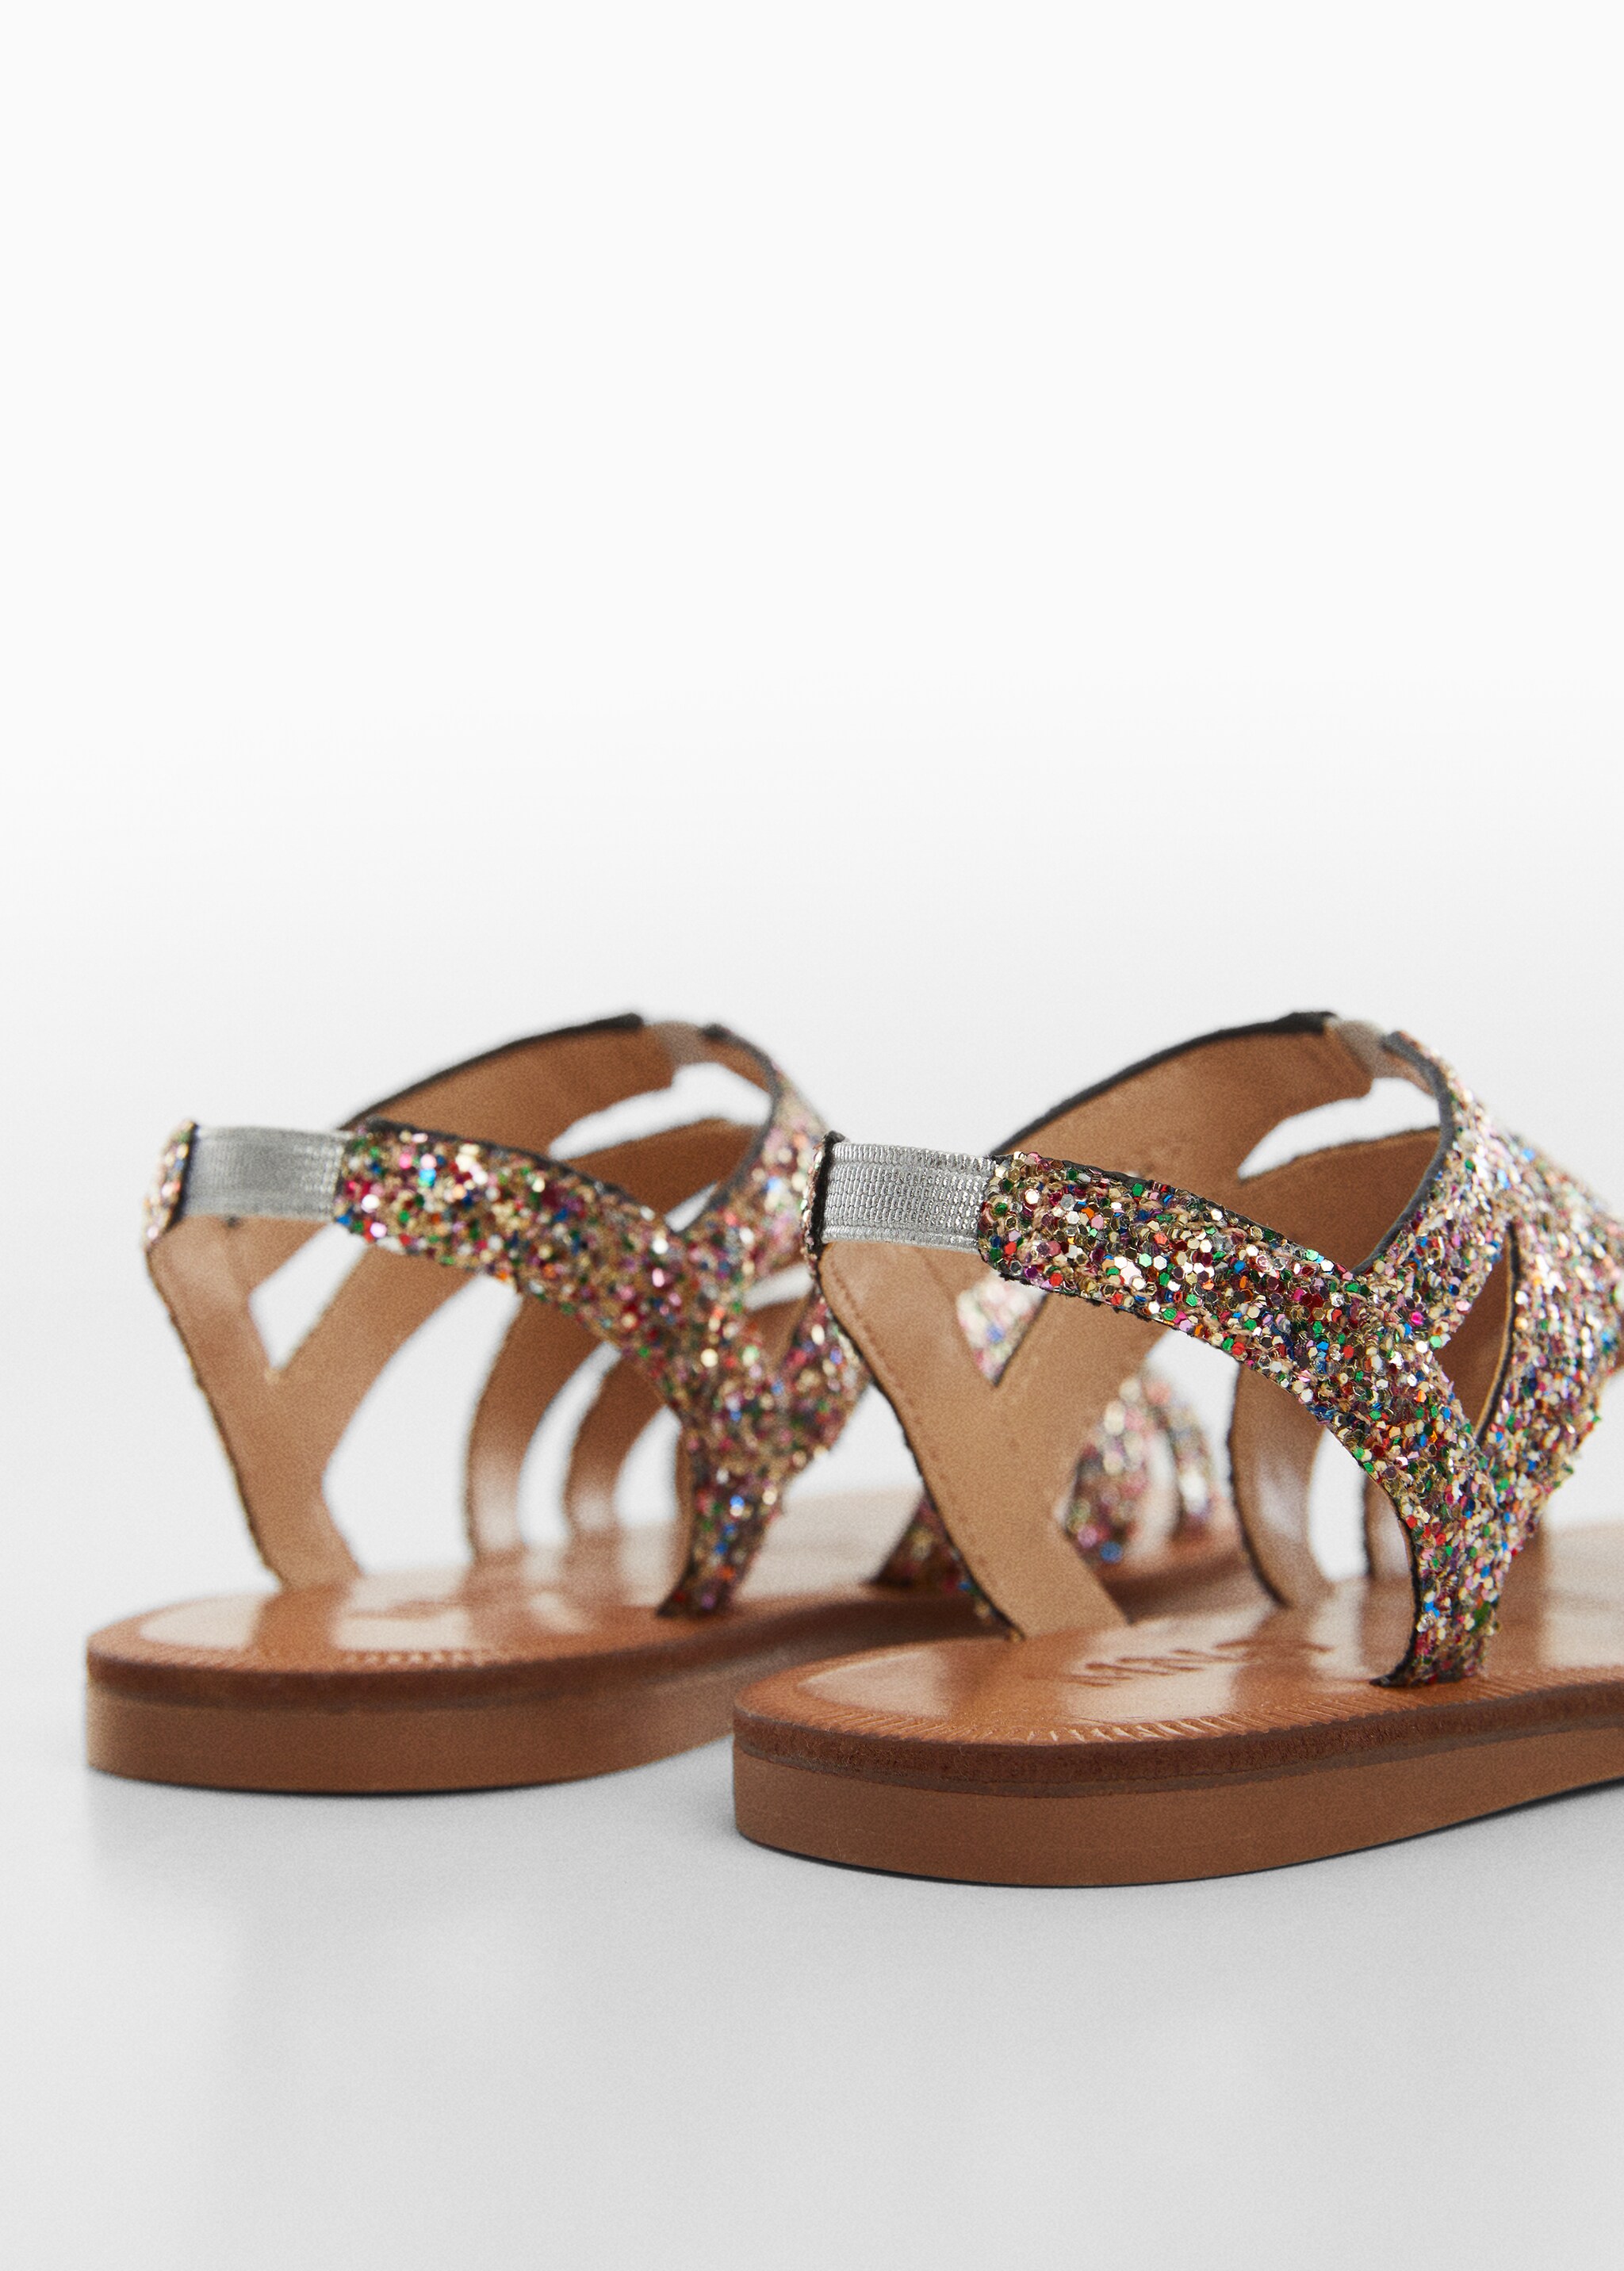 Sequin sandals - Details of the article 1